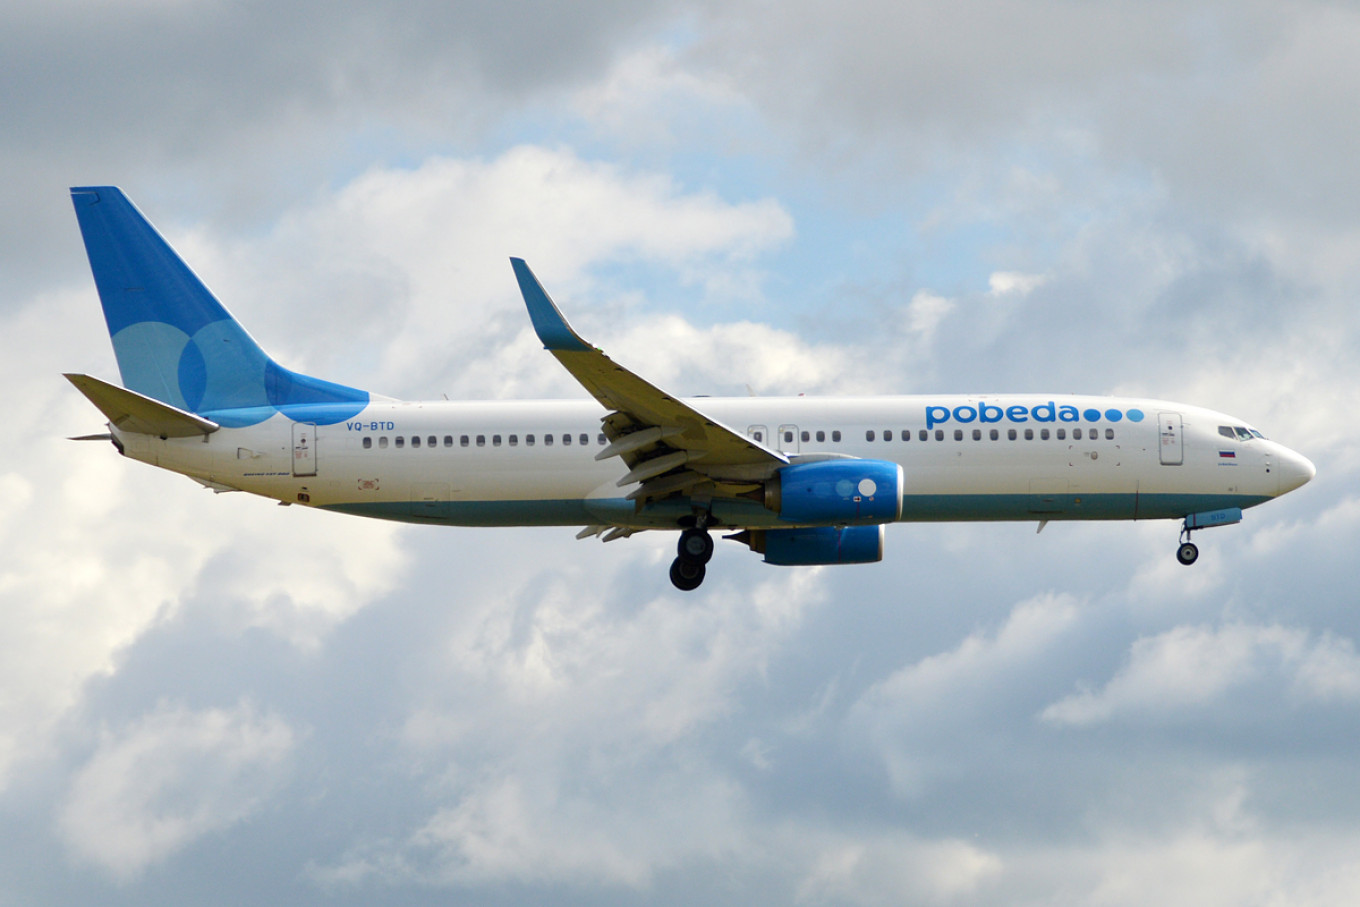 Russia’s Pobeda Airline (Finally) Relaxes Hand Luggage Rules